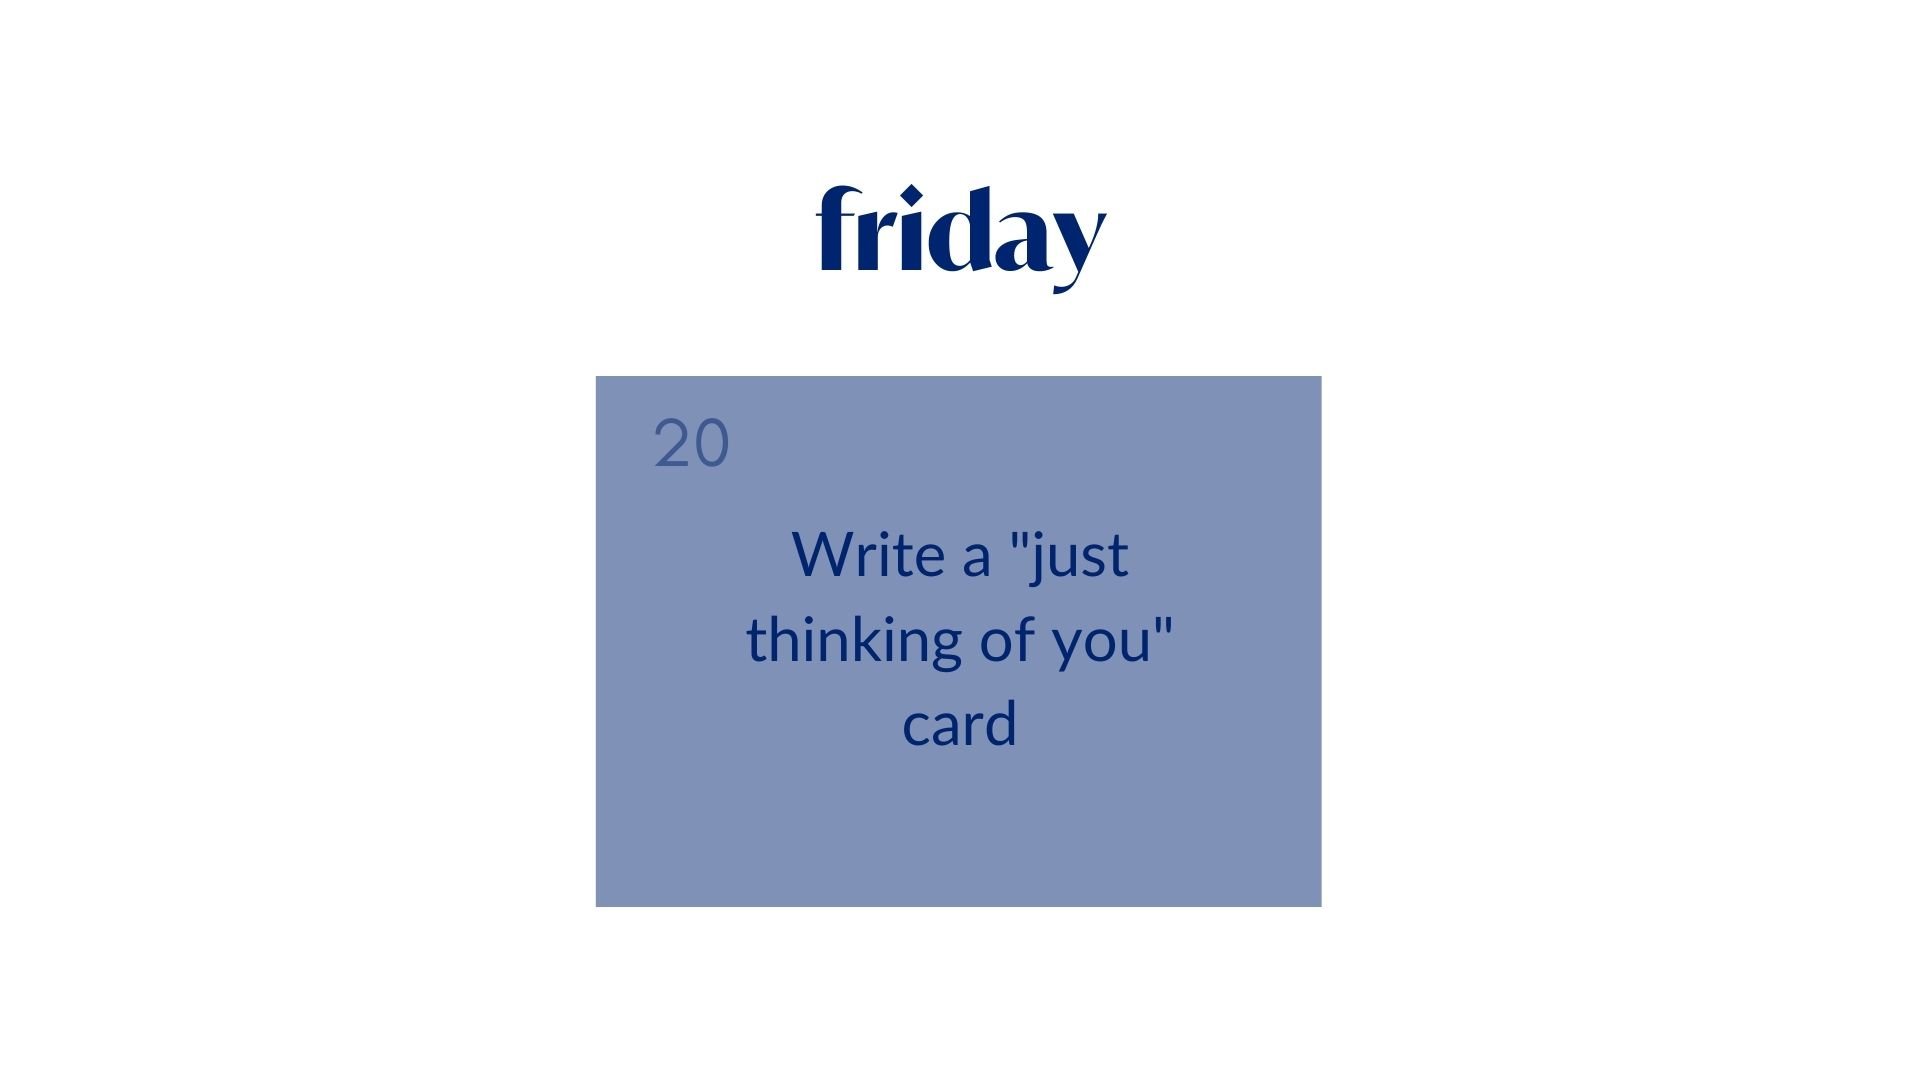 Day 20: Write a "just thinking of you" card